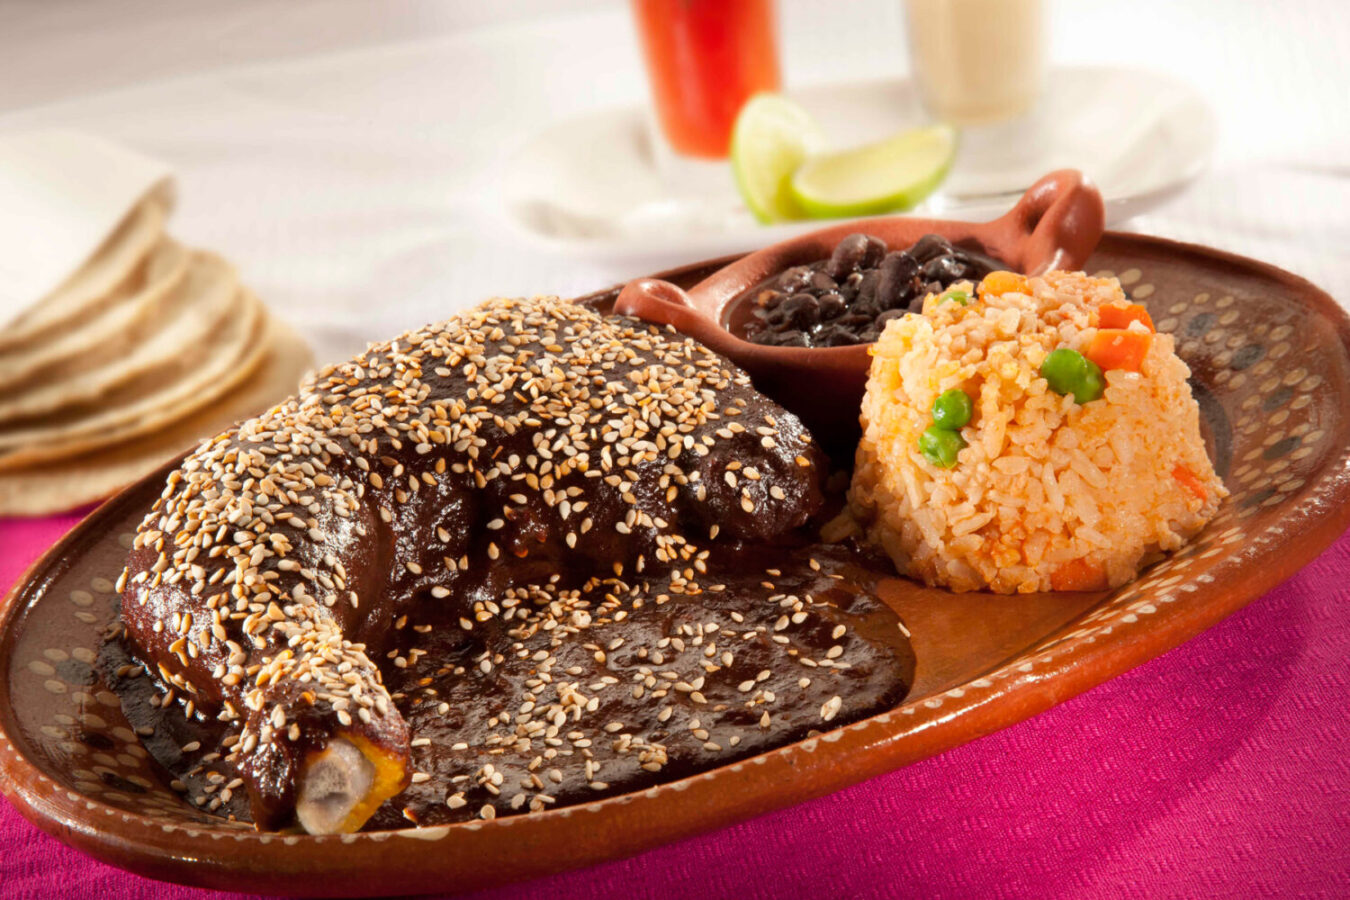 Mexico: With ‘M’ of Mole